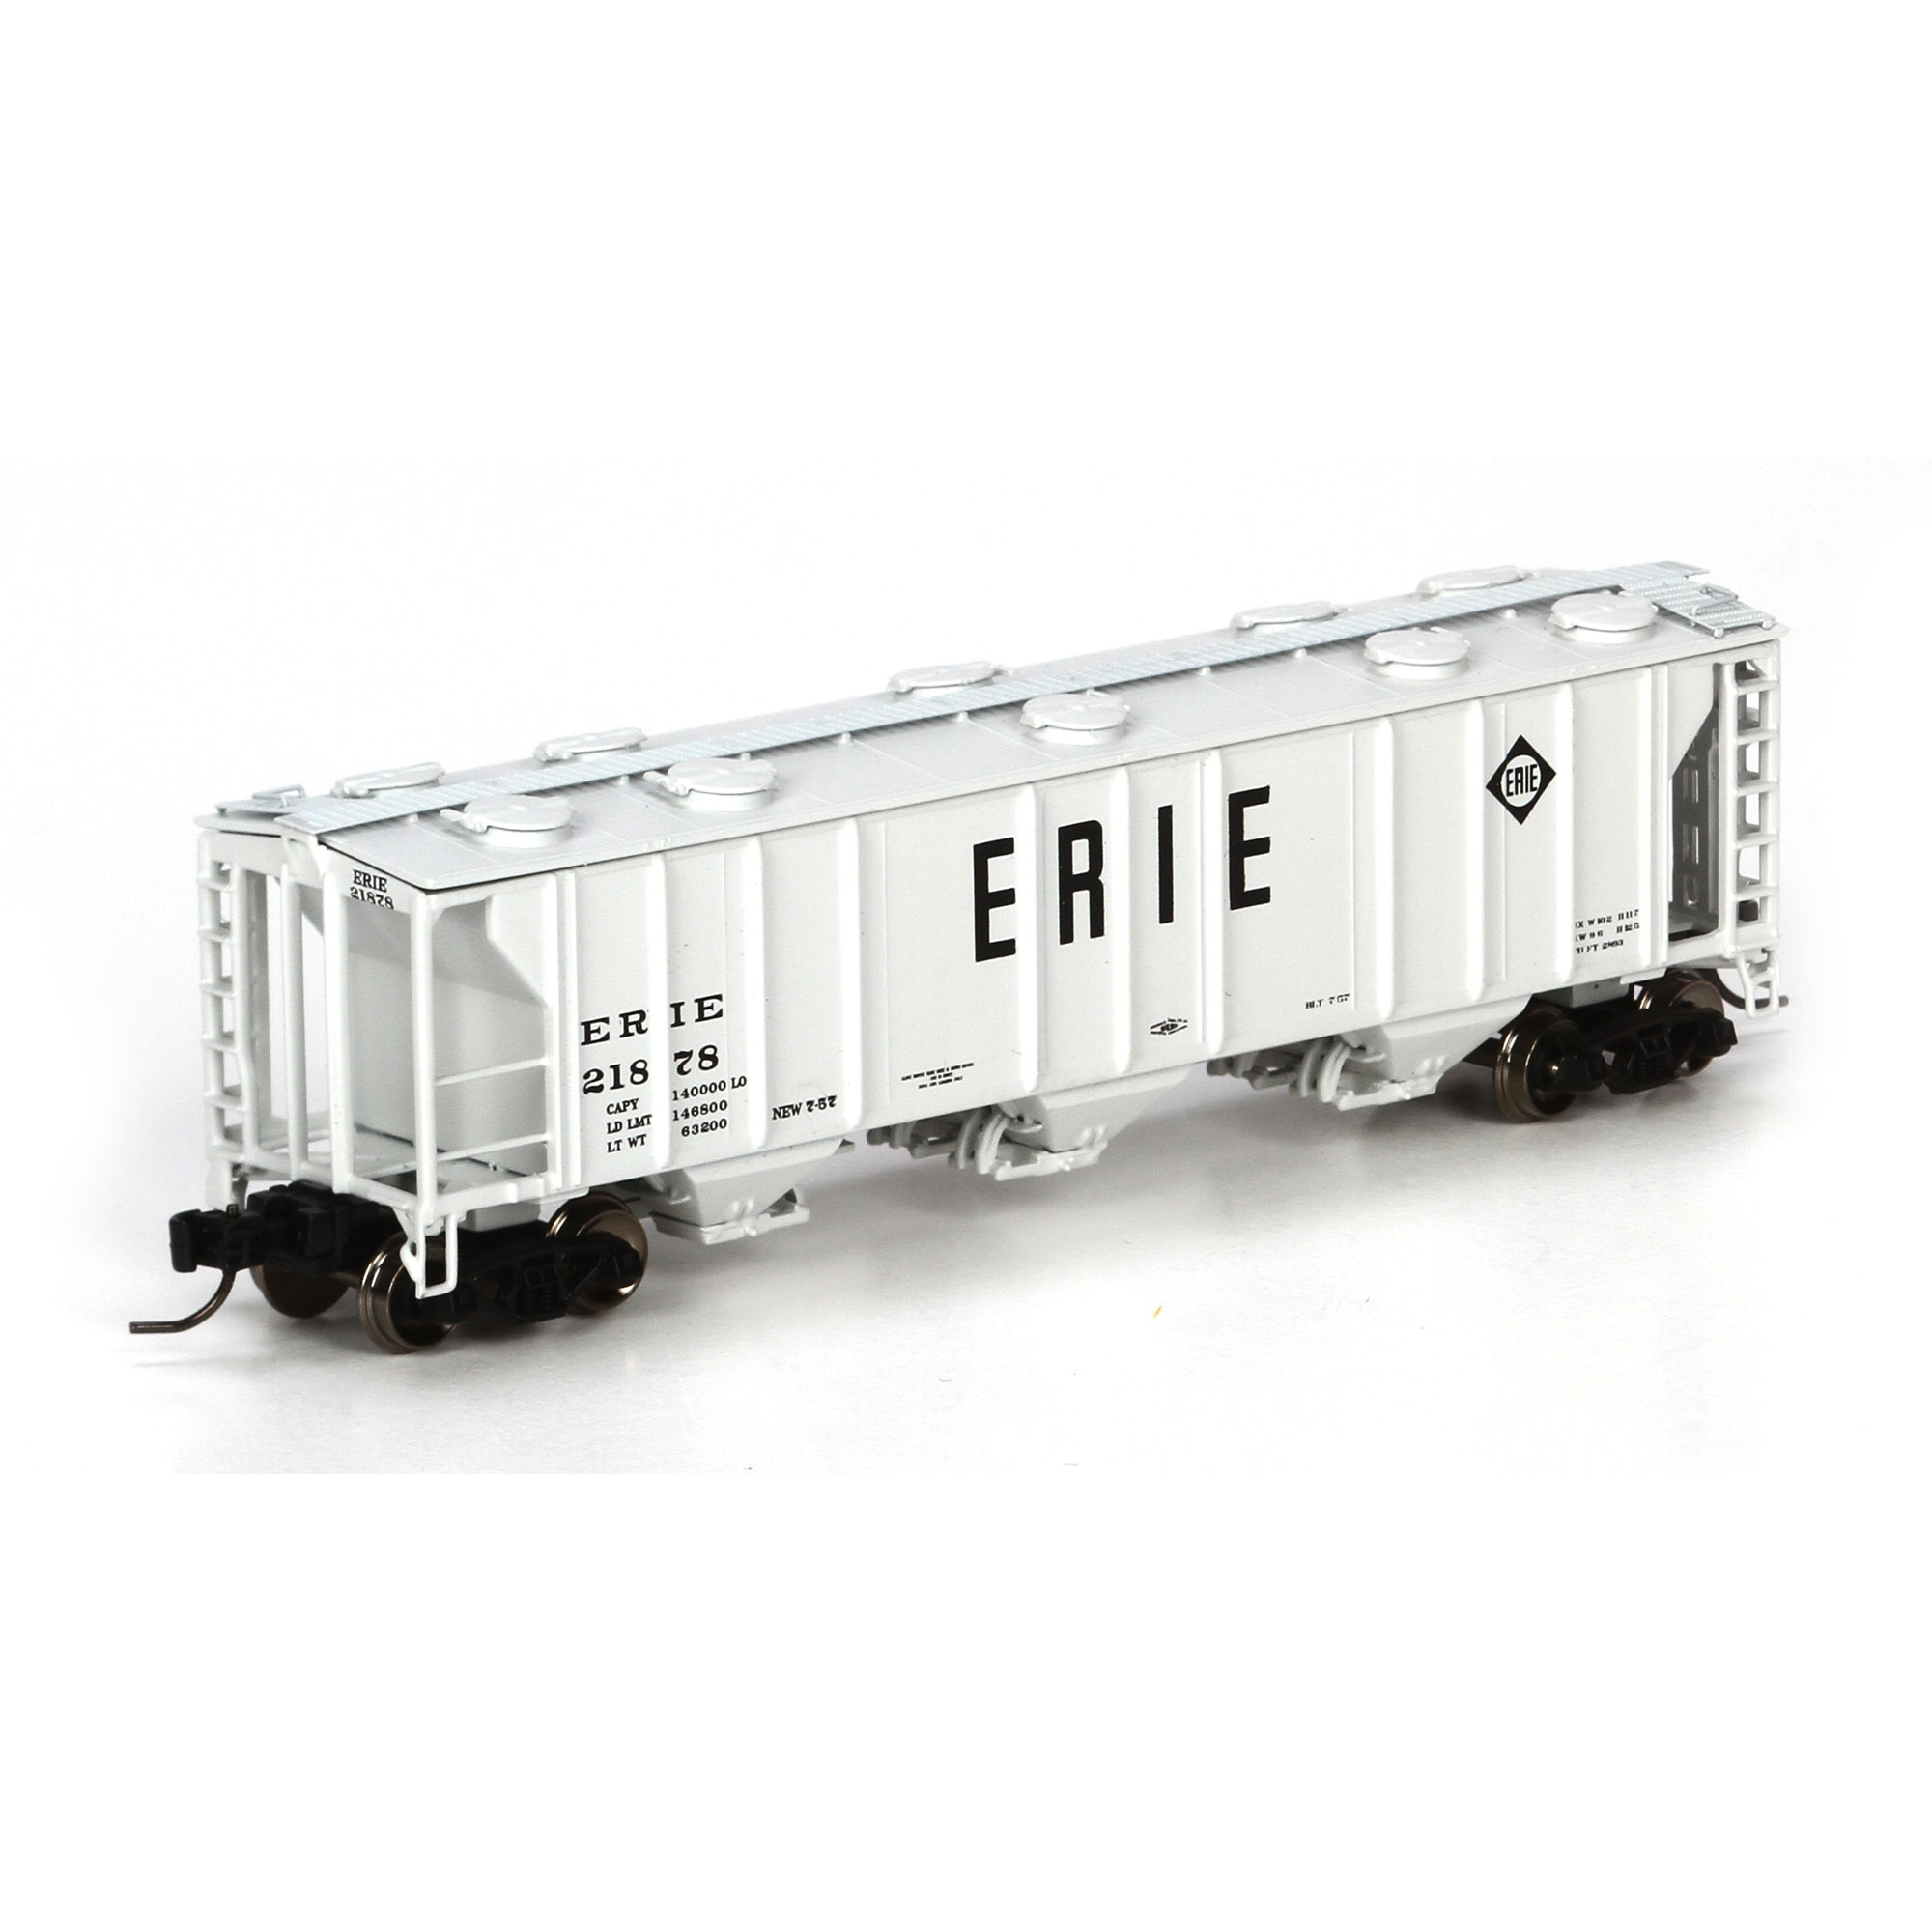 N Scale - Athearn - 23825 - Covered Hopper, 3-Bay, PS-2 2893 - Erie - 21878